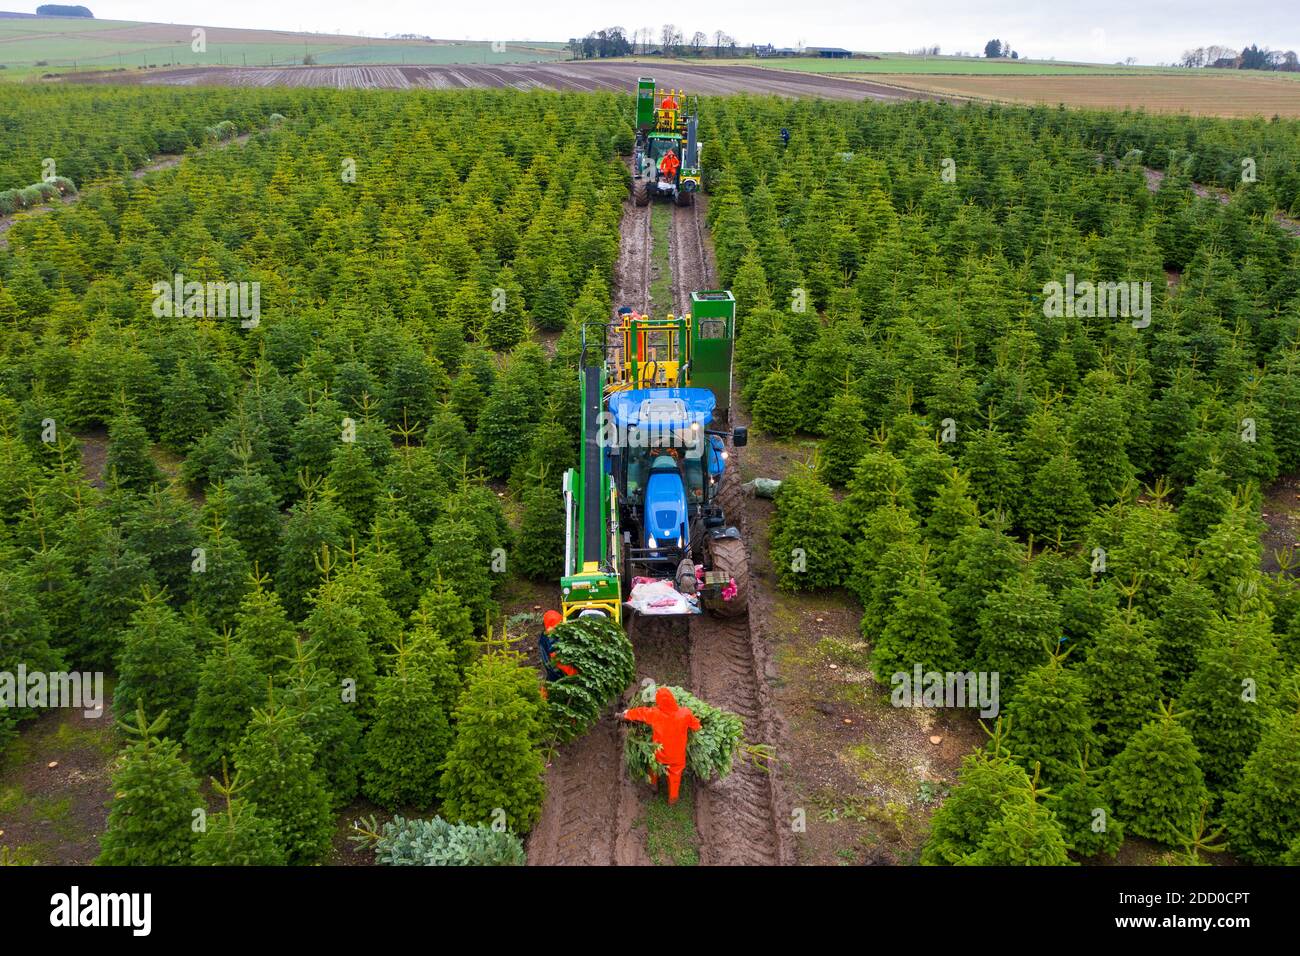 Milnathort, Scotland, UK. 23 November 2020. Christmas trees are being harvested in a plantation near Milnathort in Perth and Kinross. The plantation is operated by the Kilted Tree Company based at Tillyochie Farm near Milnathort. Workers cut selected trees and these are fitted inside protective sleeves using specialist machinery on tractors before being transported to market.  Iain Masterton/Alamy Live News Stock Photo